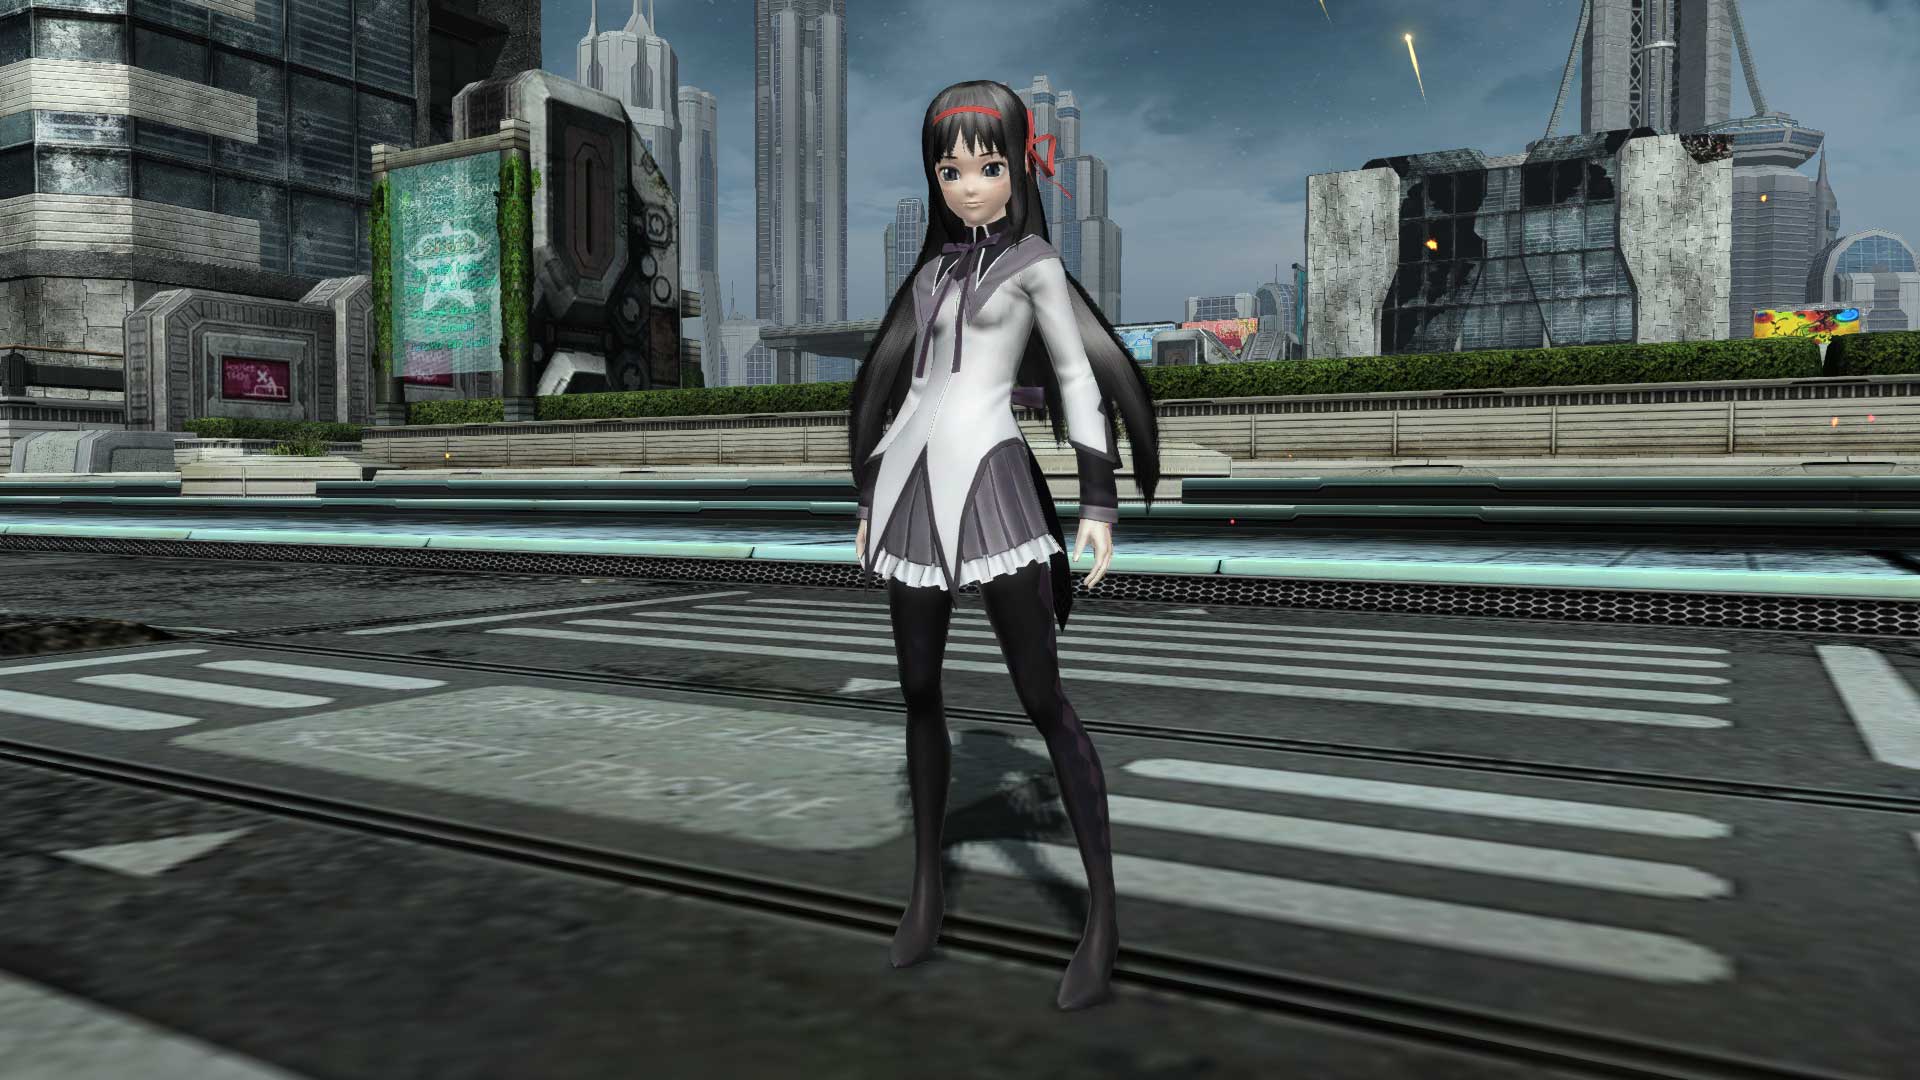 Gallery of Pso 2 Captured Outfit.